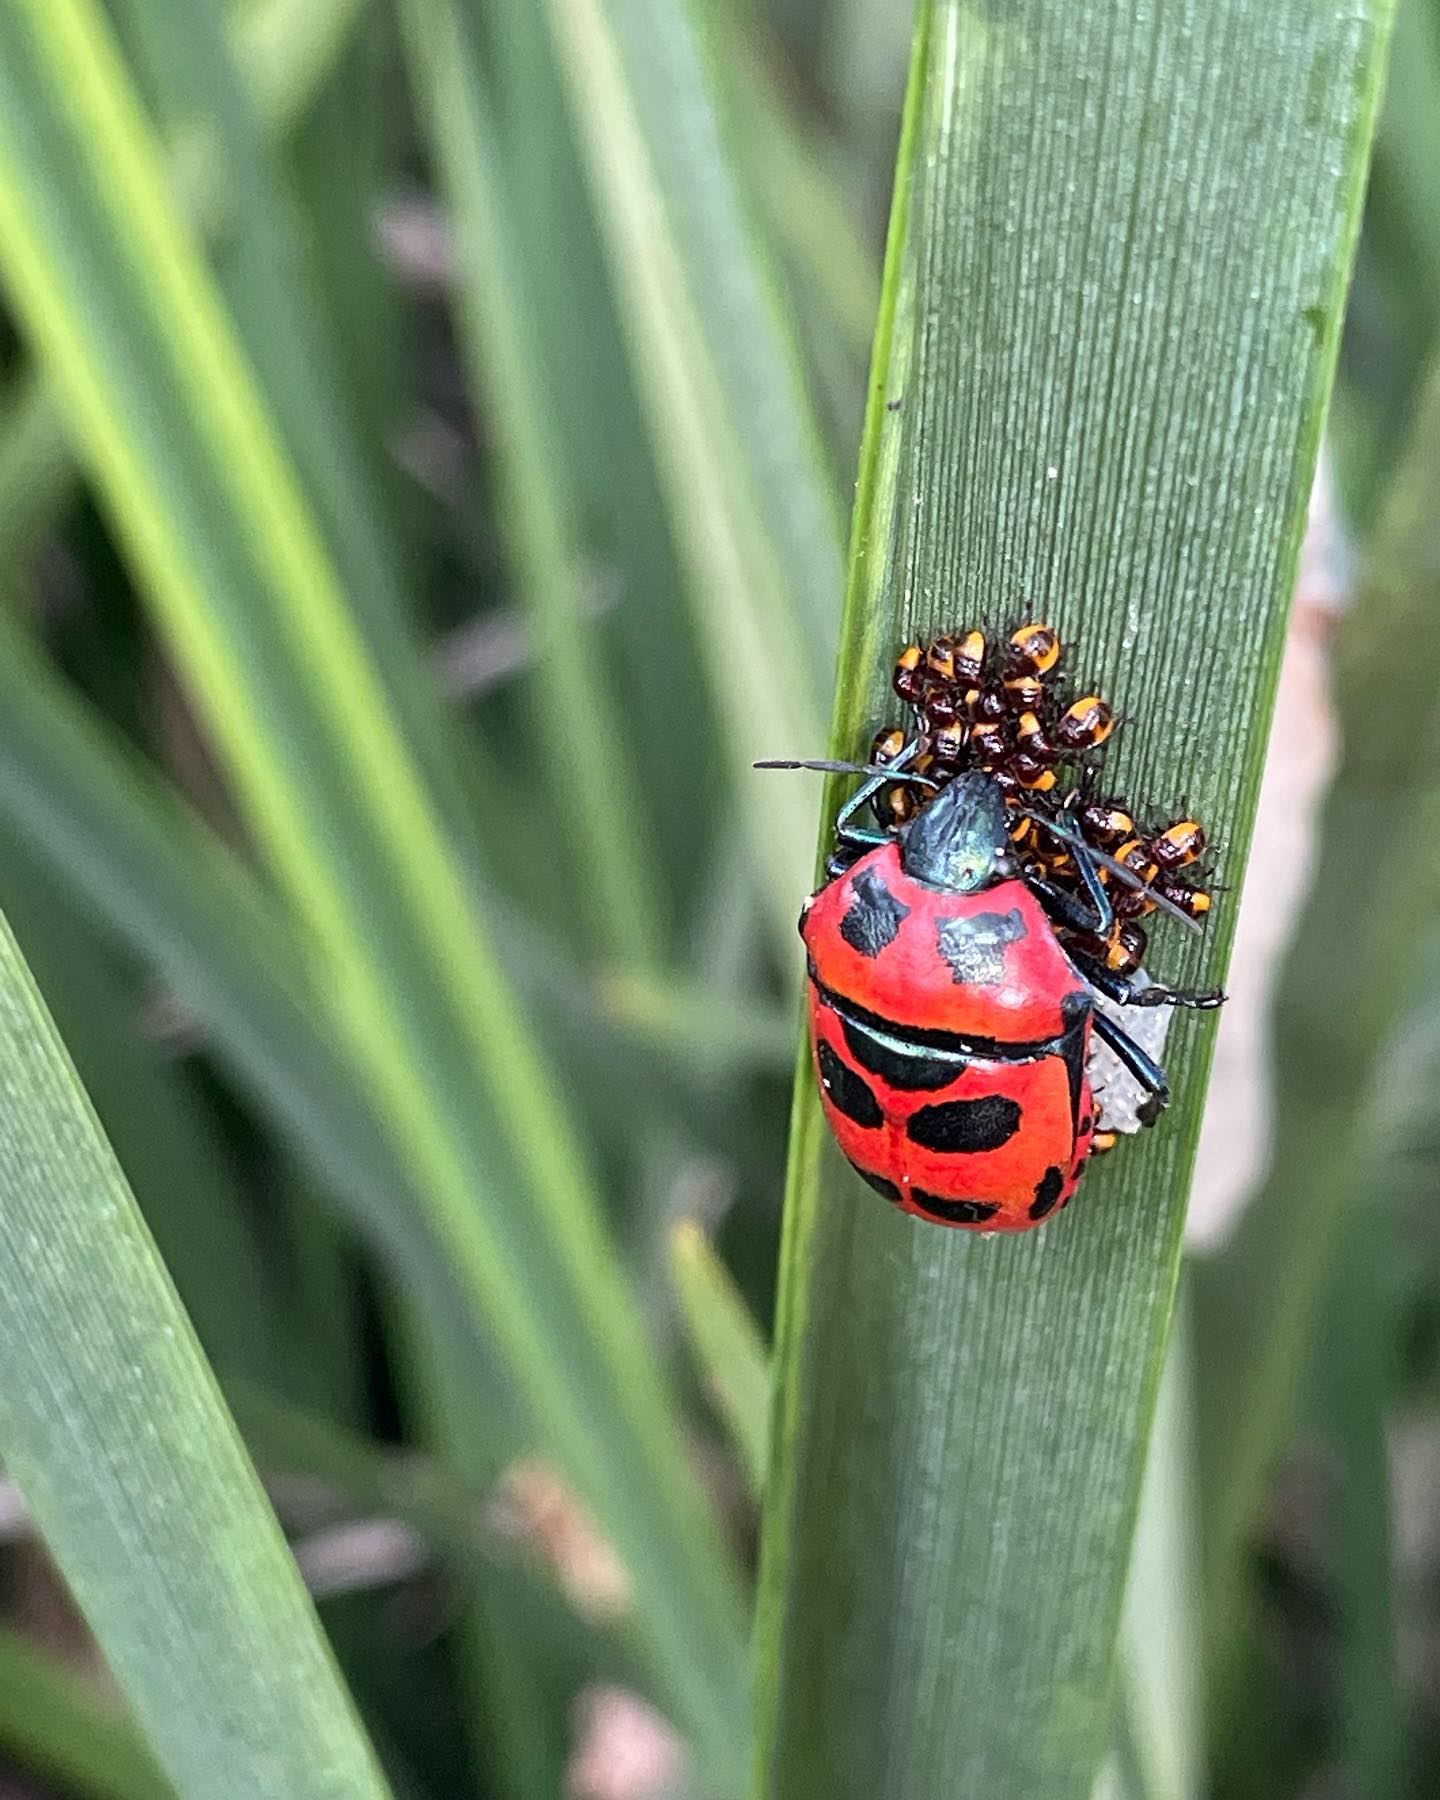 Gorgeous mother protecting all her babies! #beetle #ladybird #bugs #bug #insect #entomology #mother